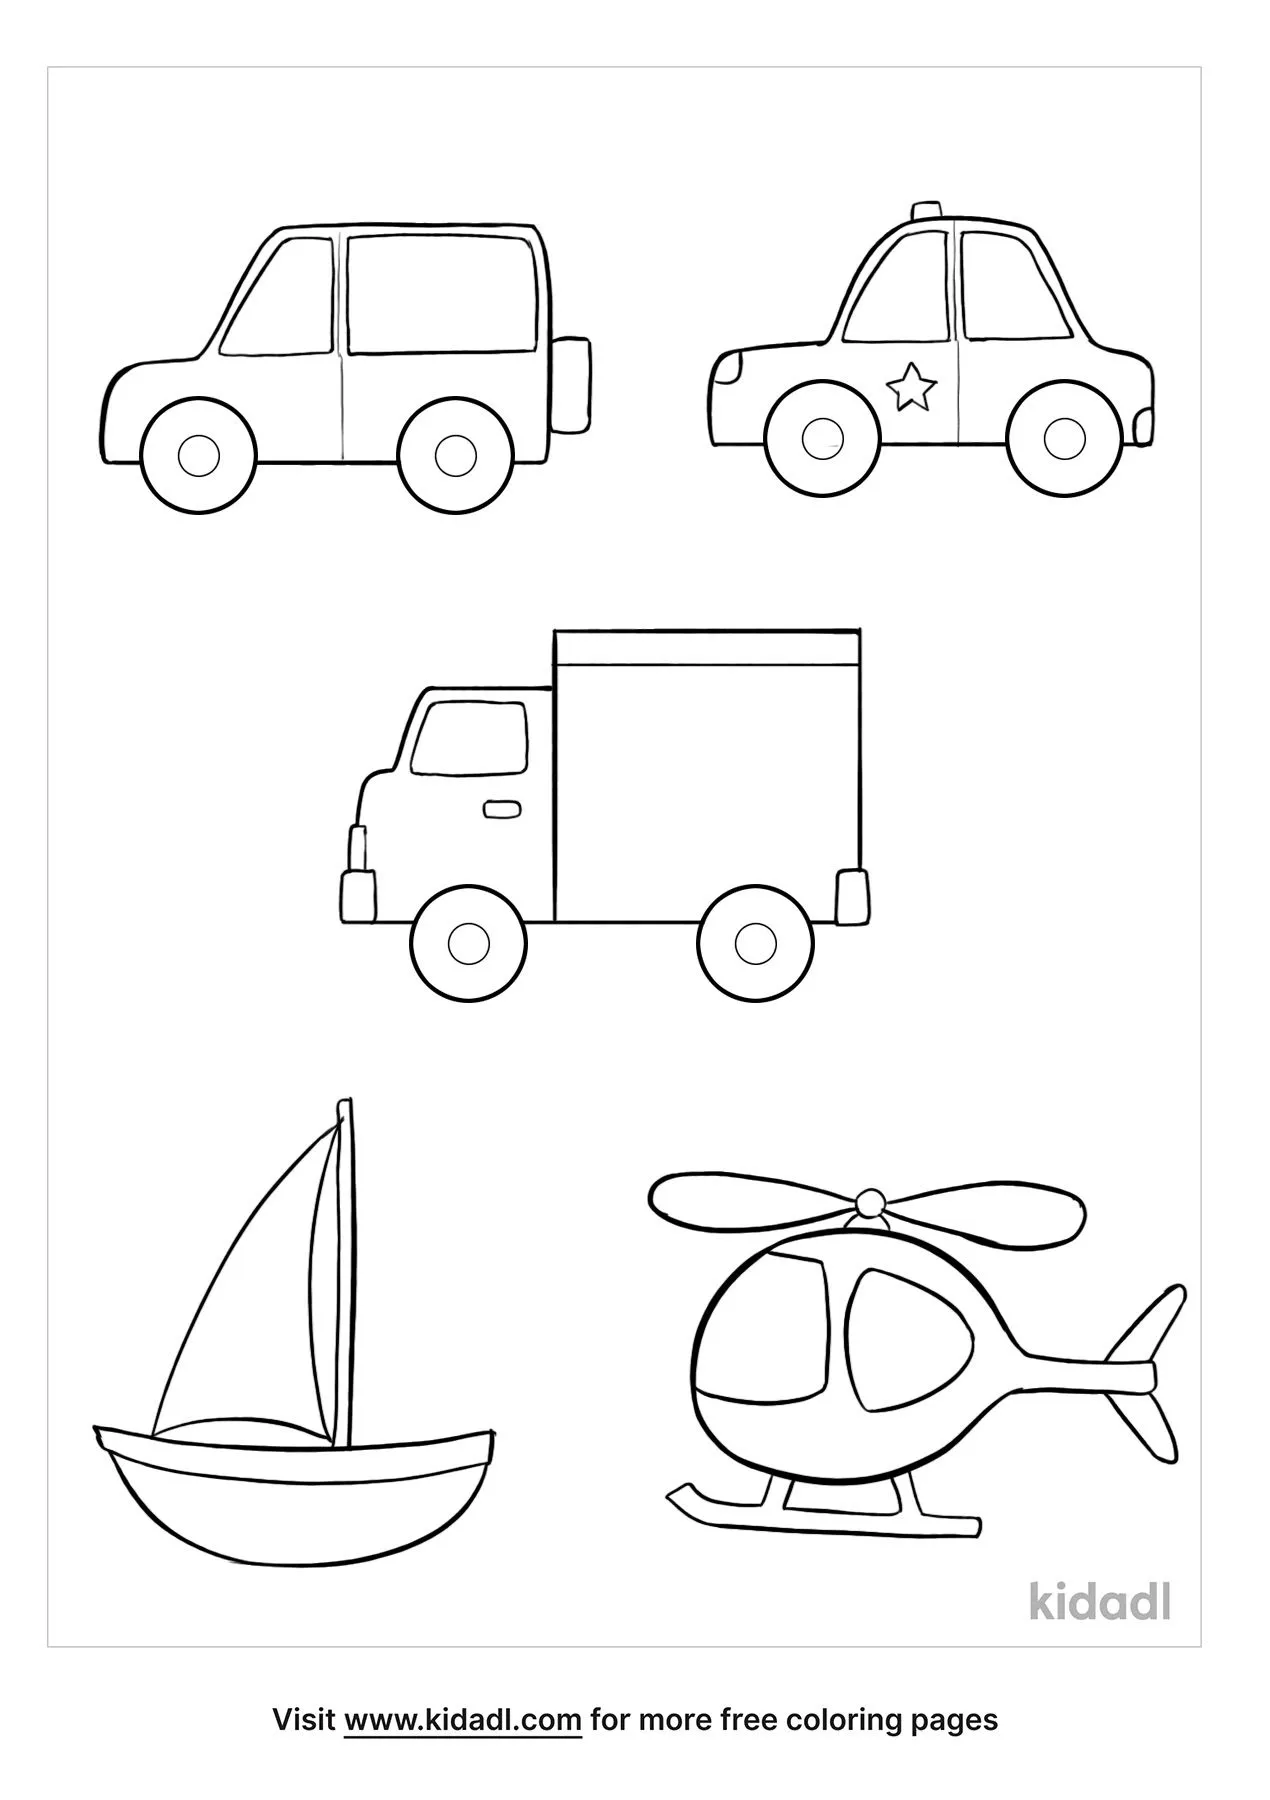 Vehicles Coloring Page